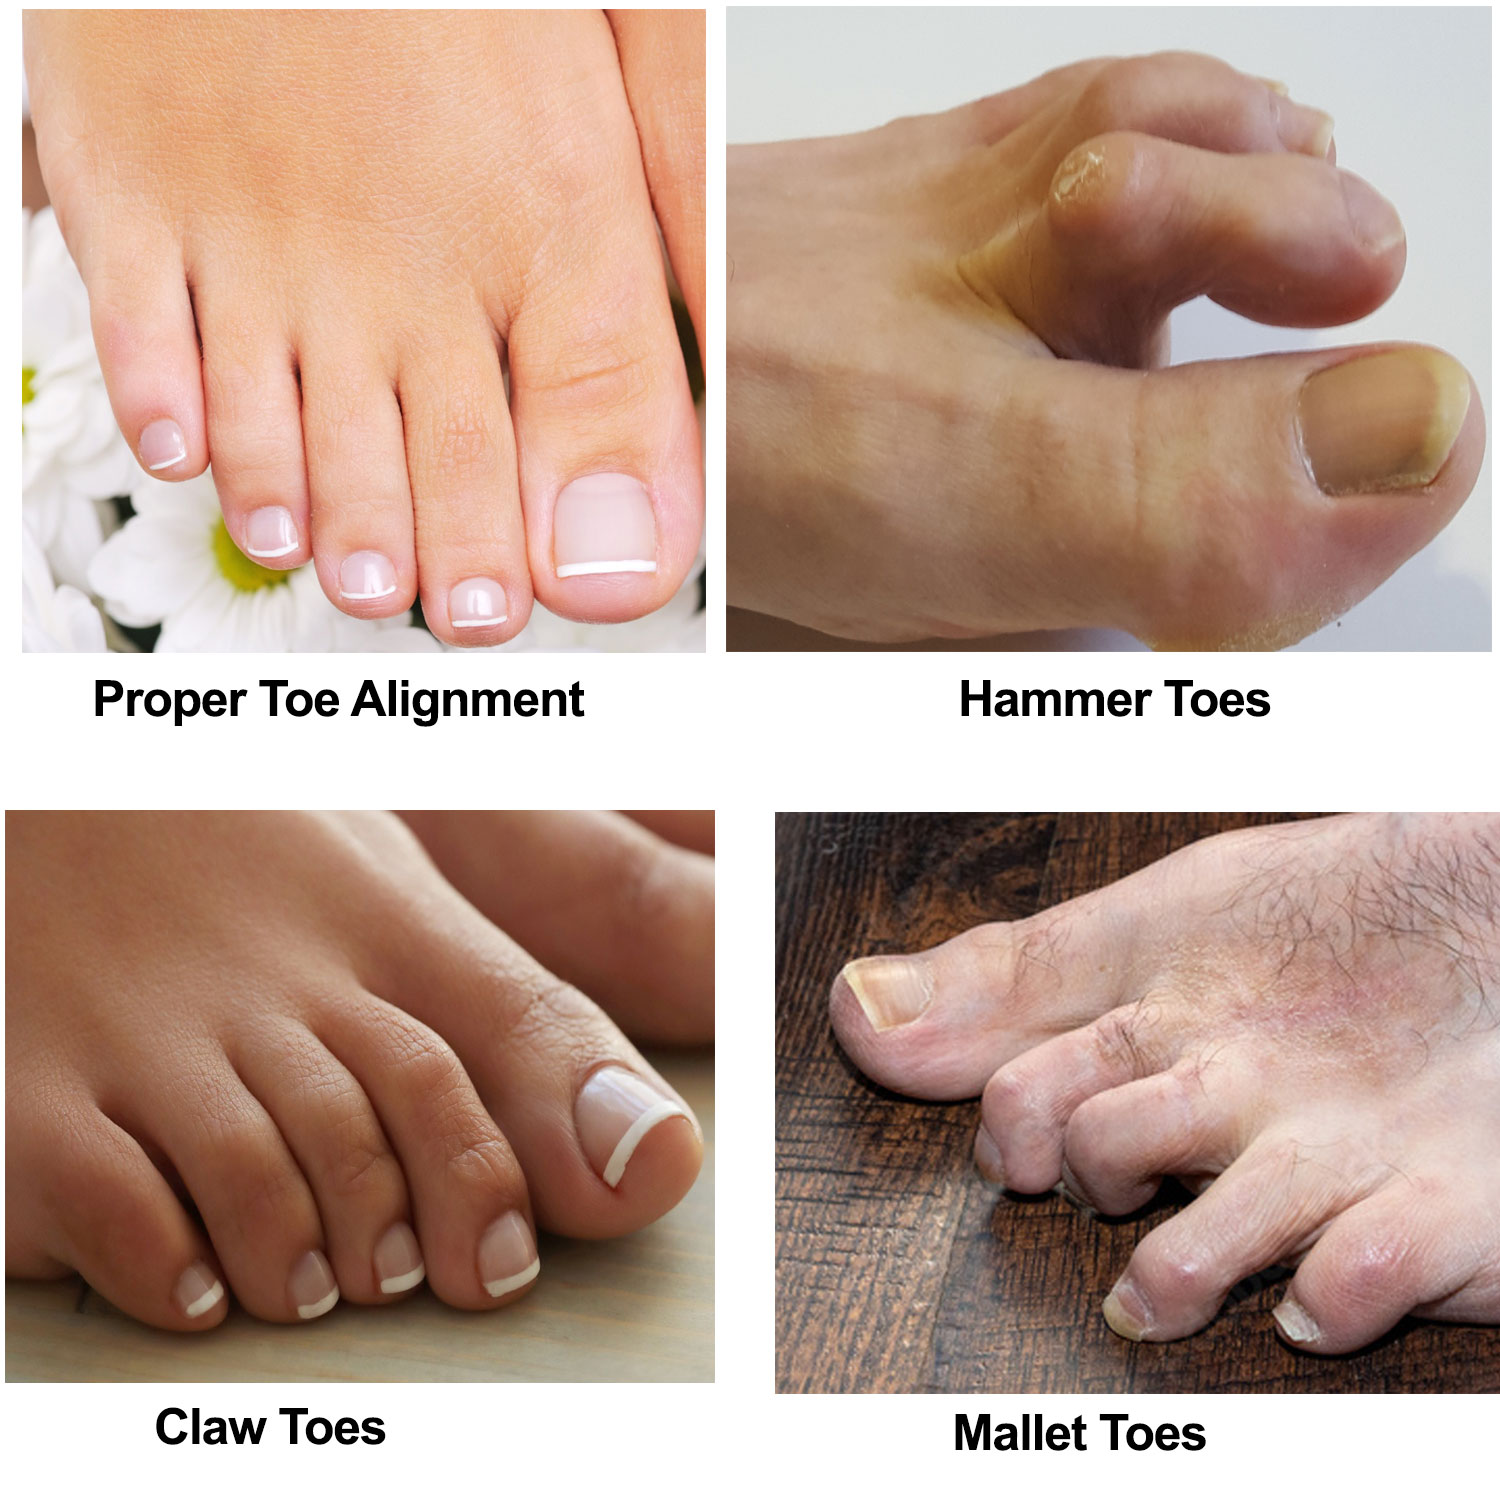 toe comparisons - hammertoes, claw toes, mallet toes